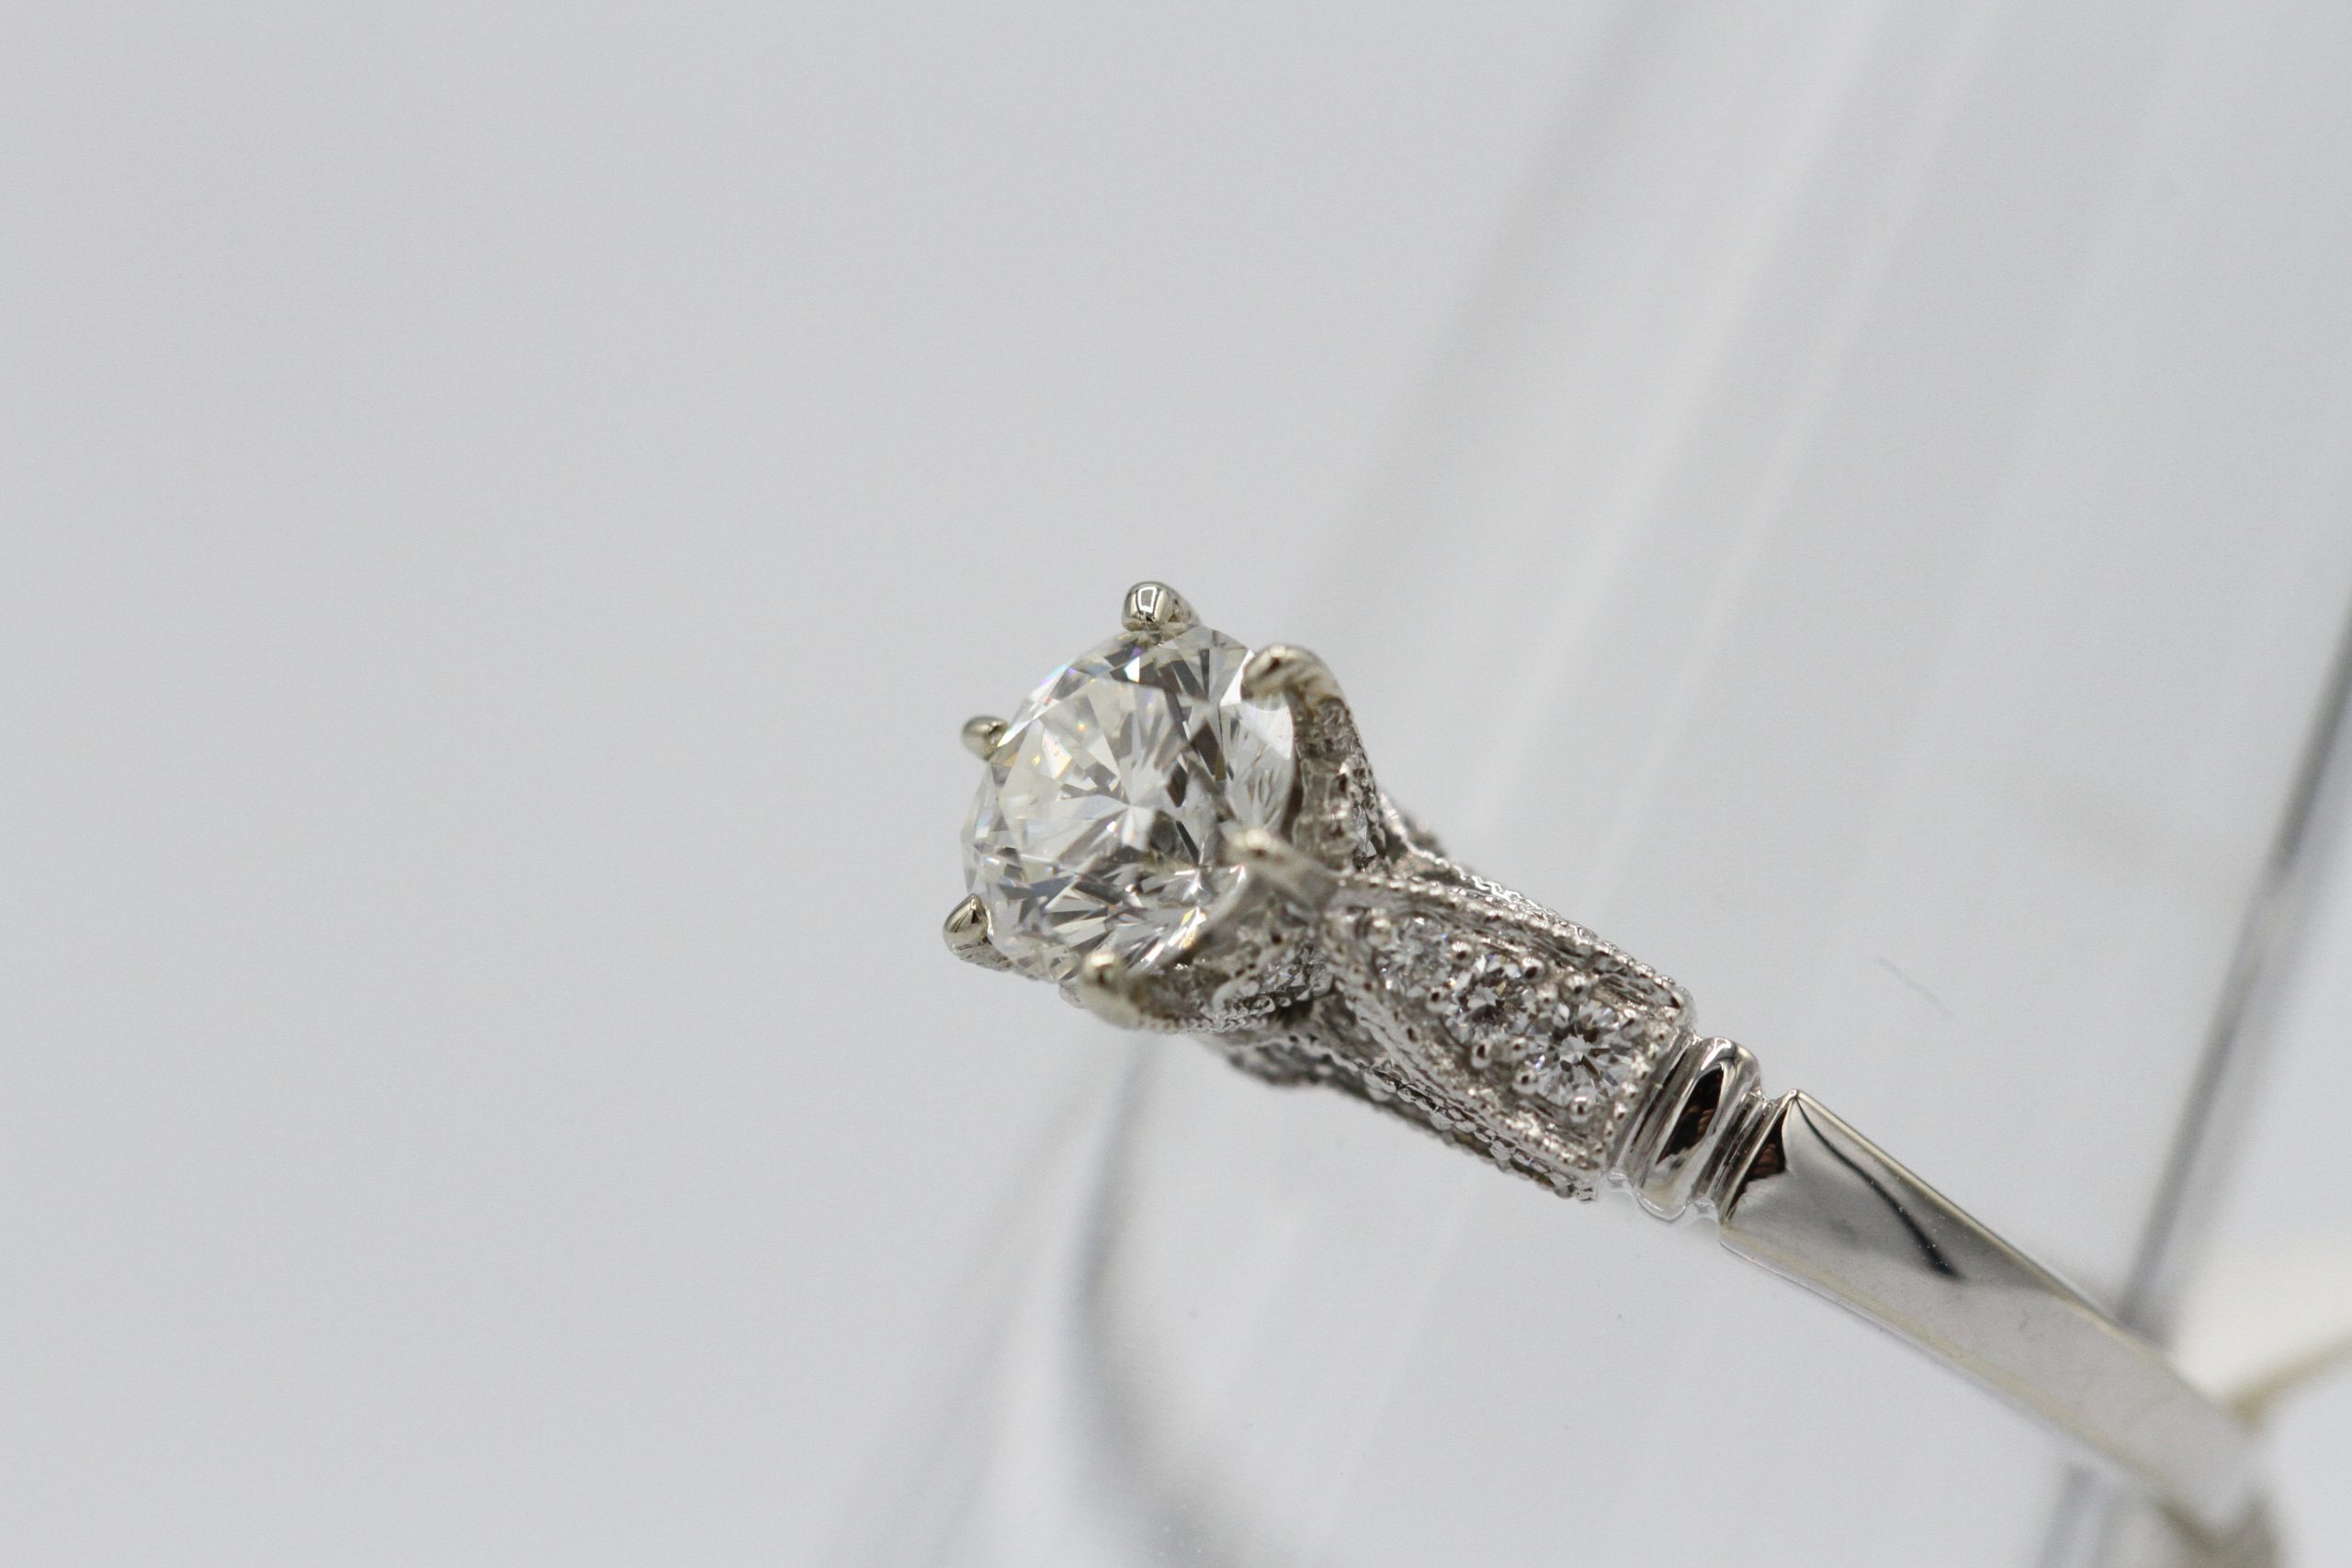 A large silver ring with a large diamond stone